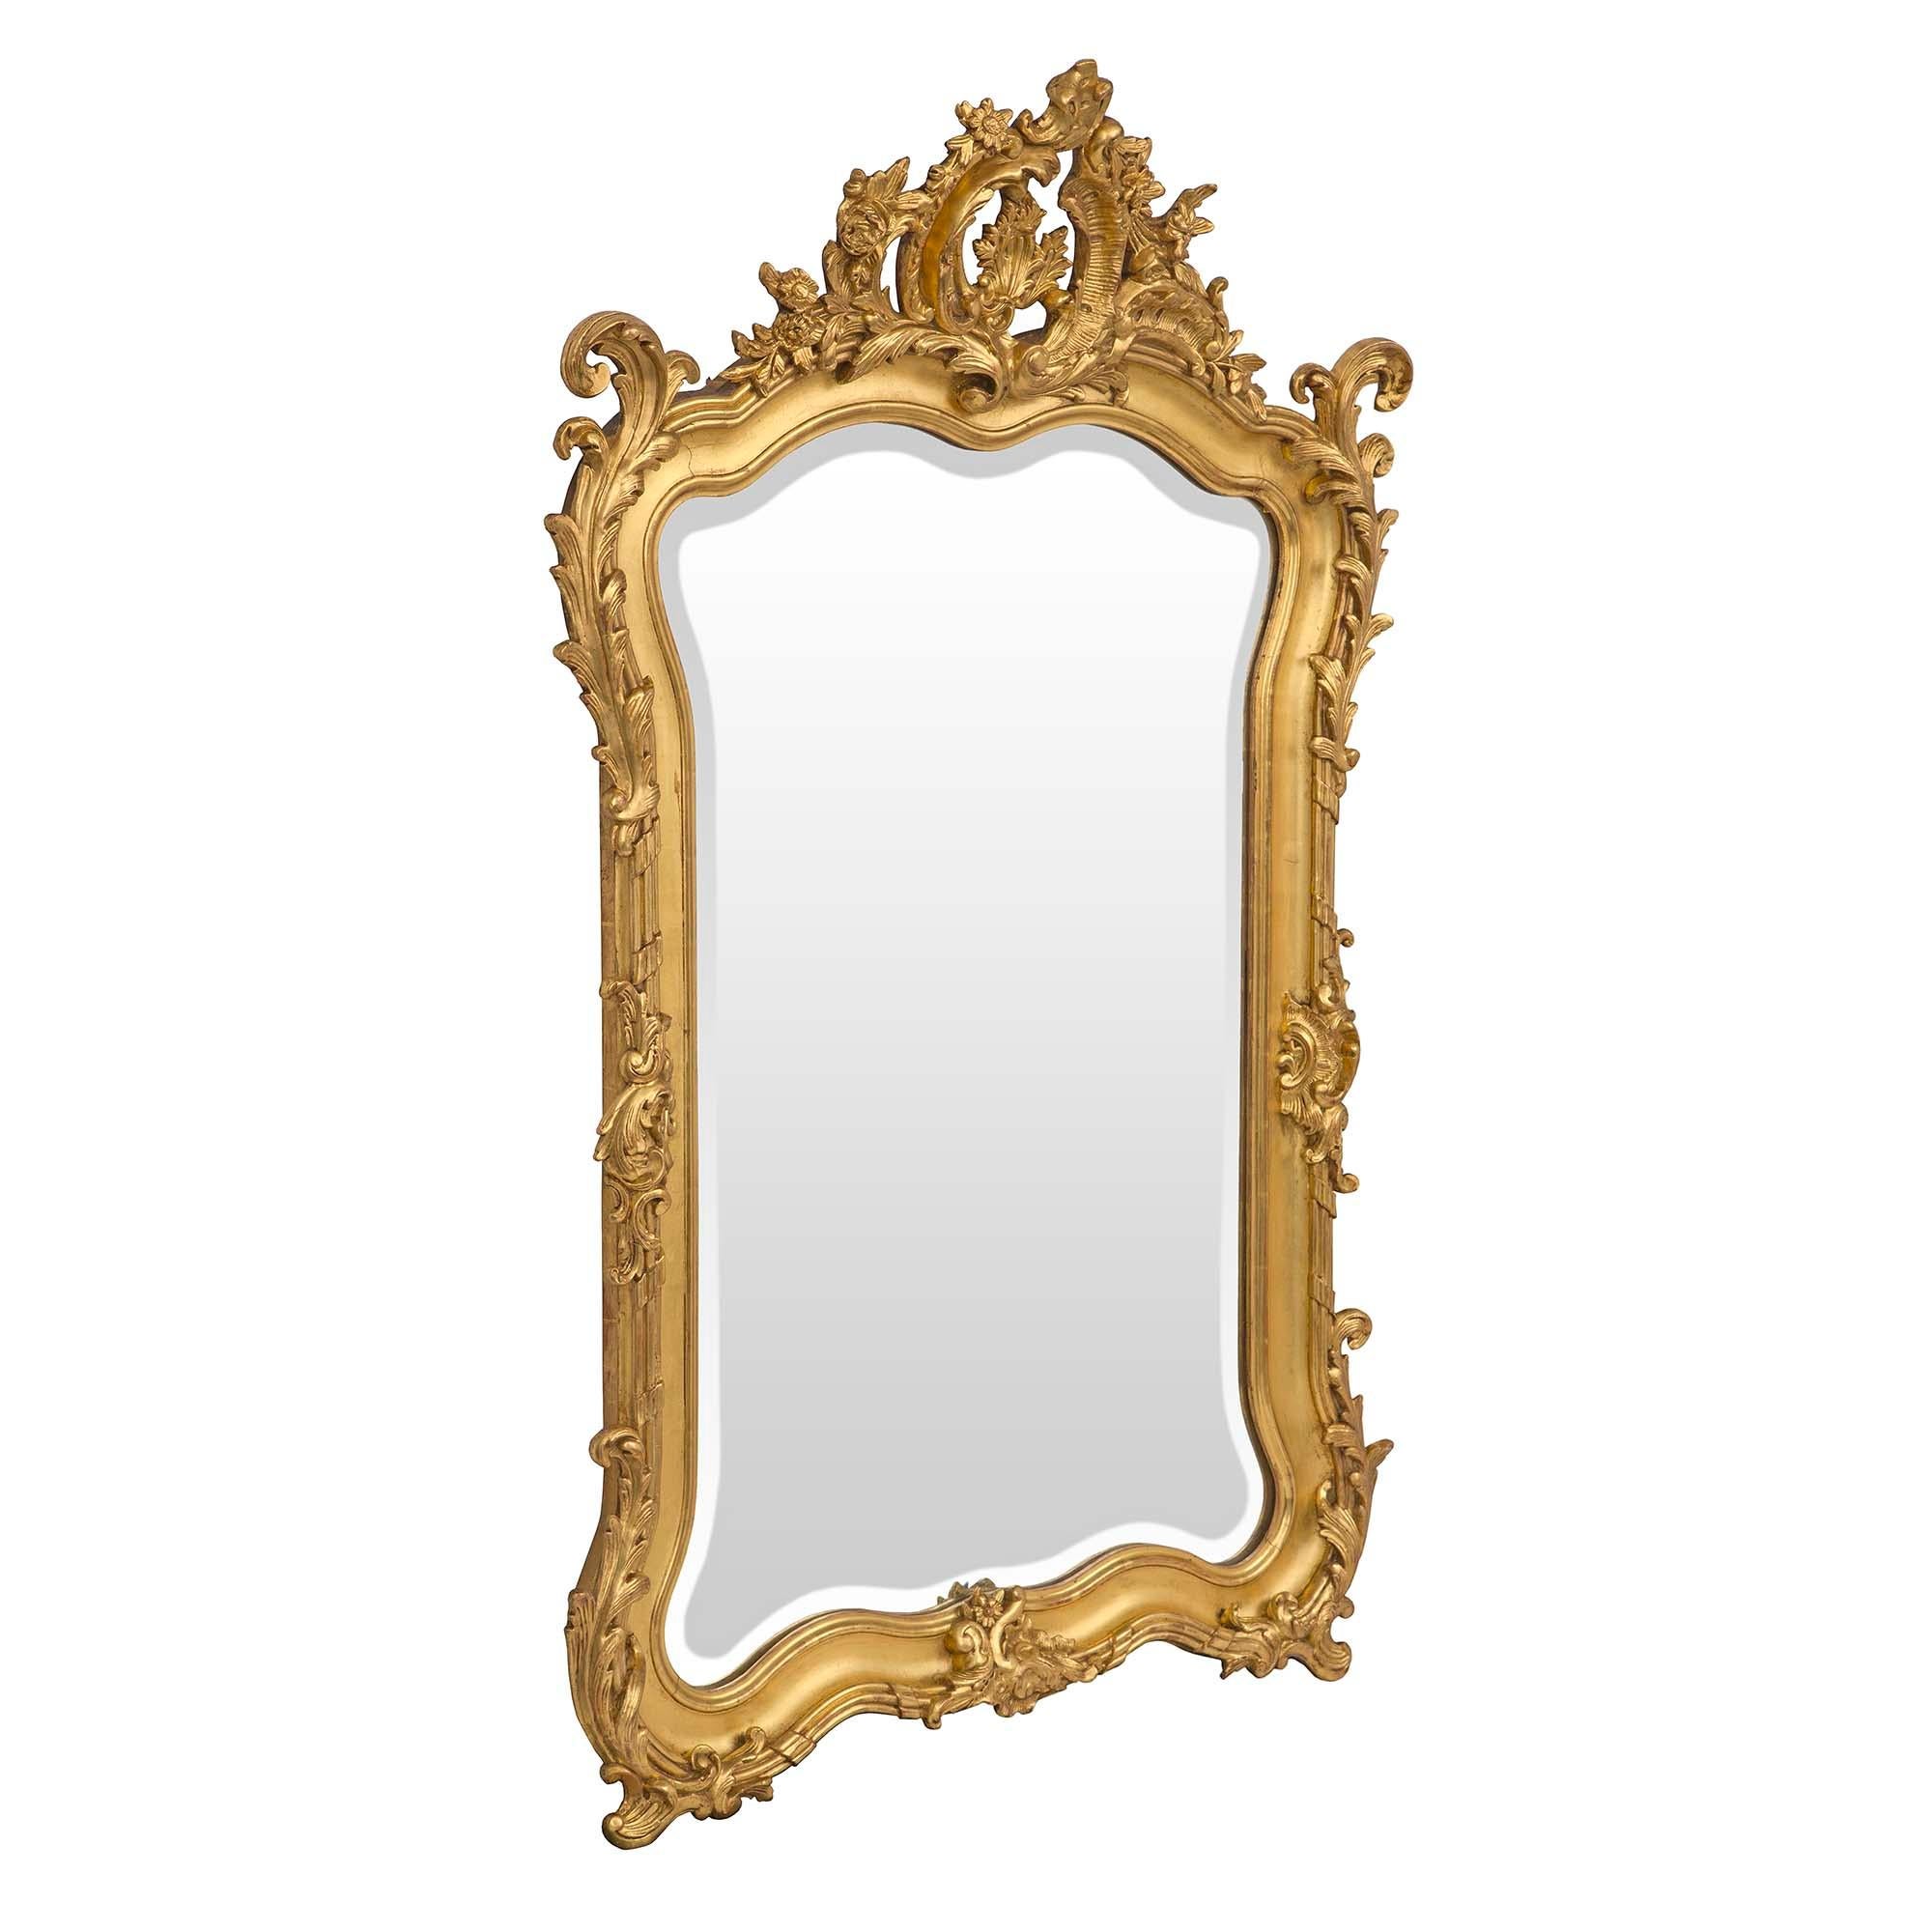 An exceptional French 19th century Louis XV st. giltwood mirror. The original beveled mirror plate is framed within an elegant curved border with two scrolled foliate bottom feet centering a finely carved reserve. Running along the side throughout